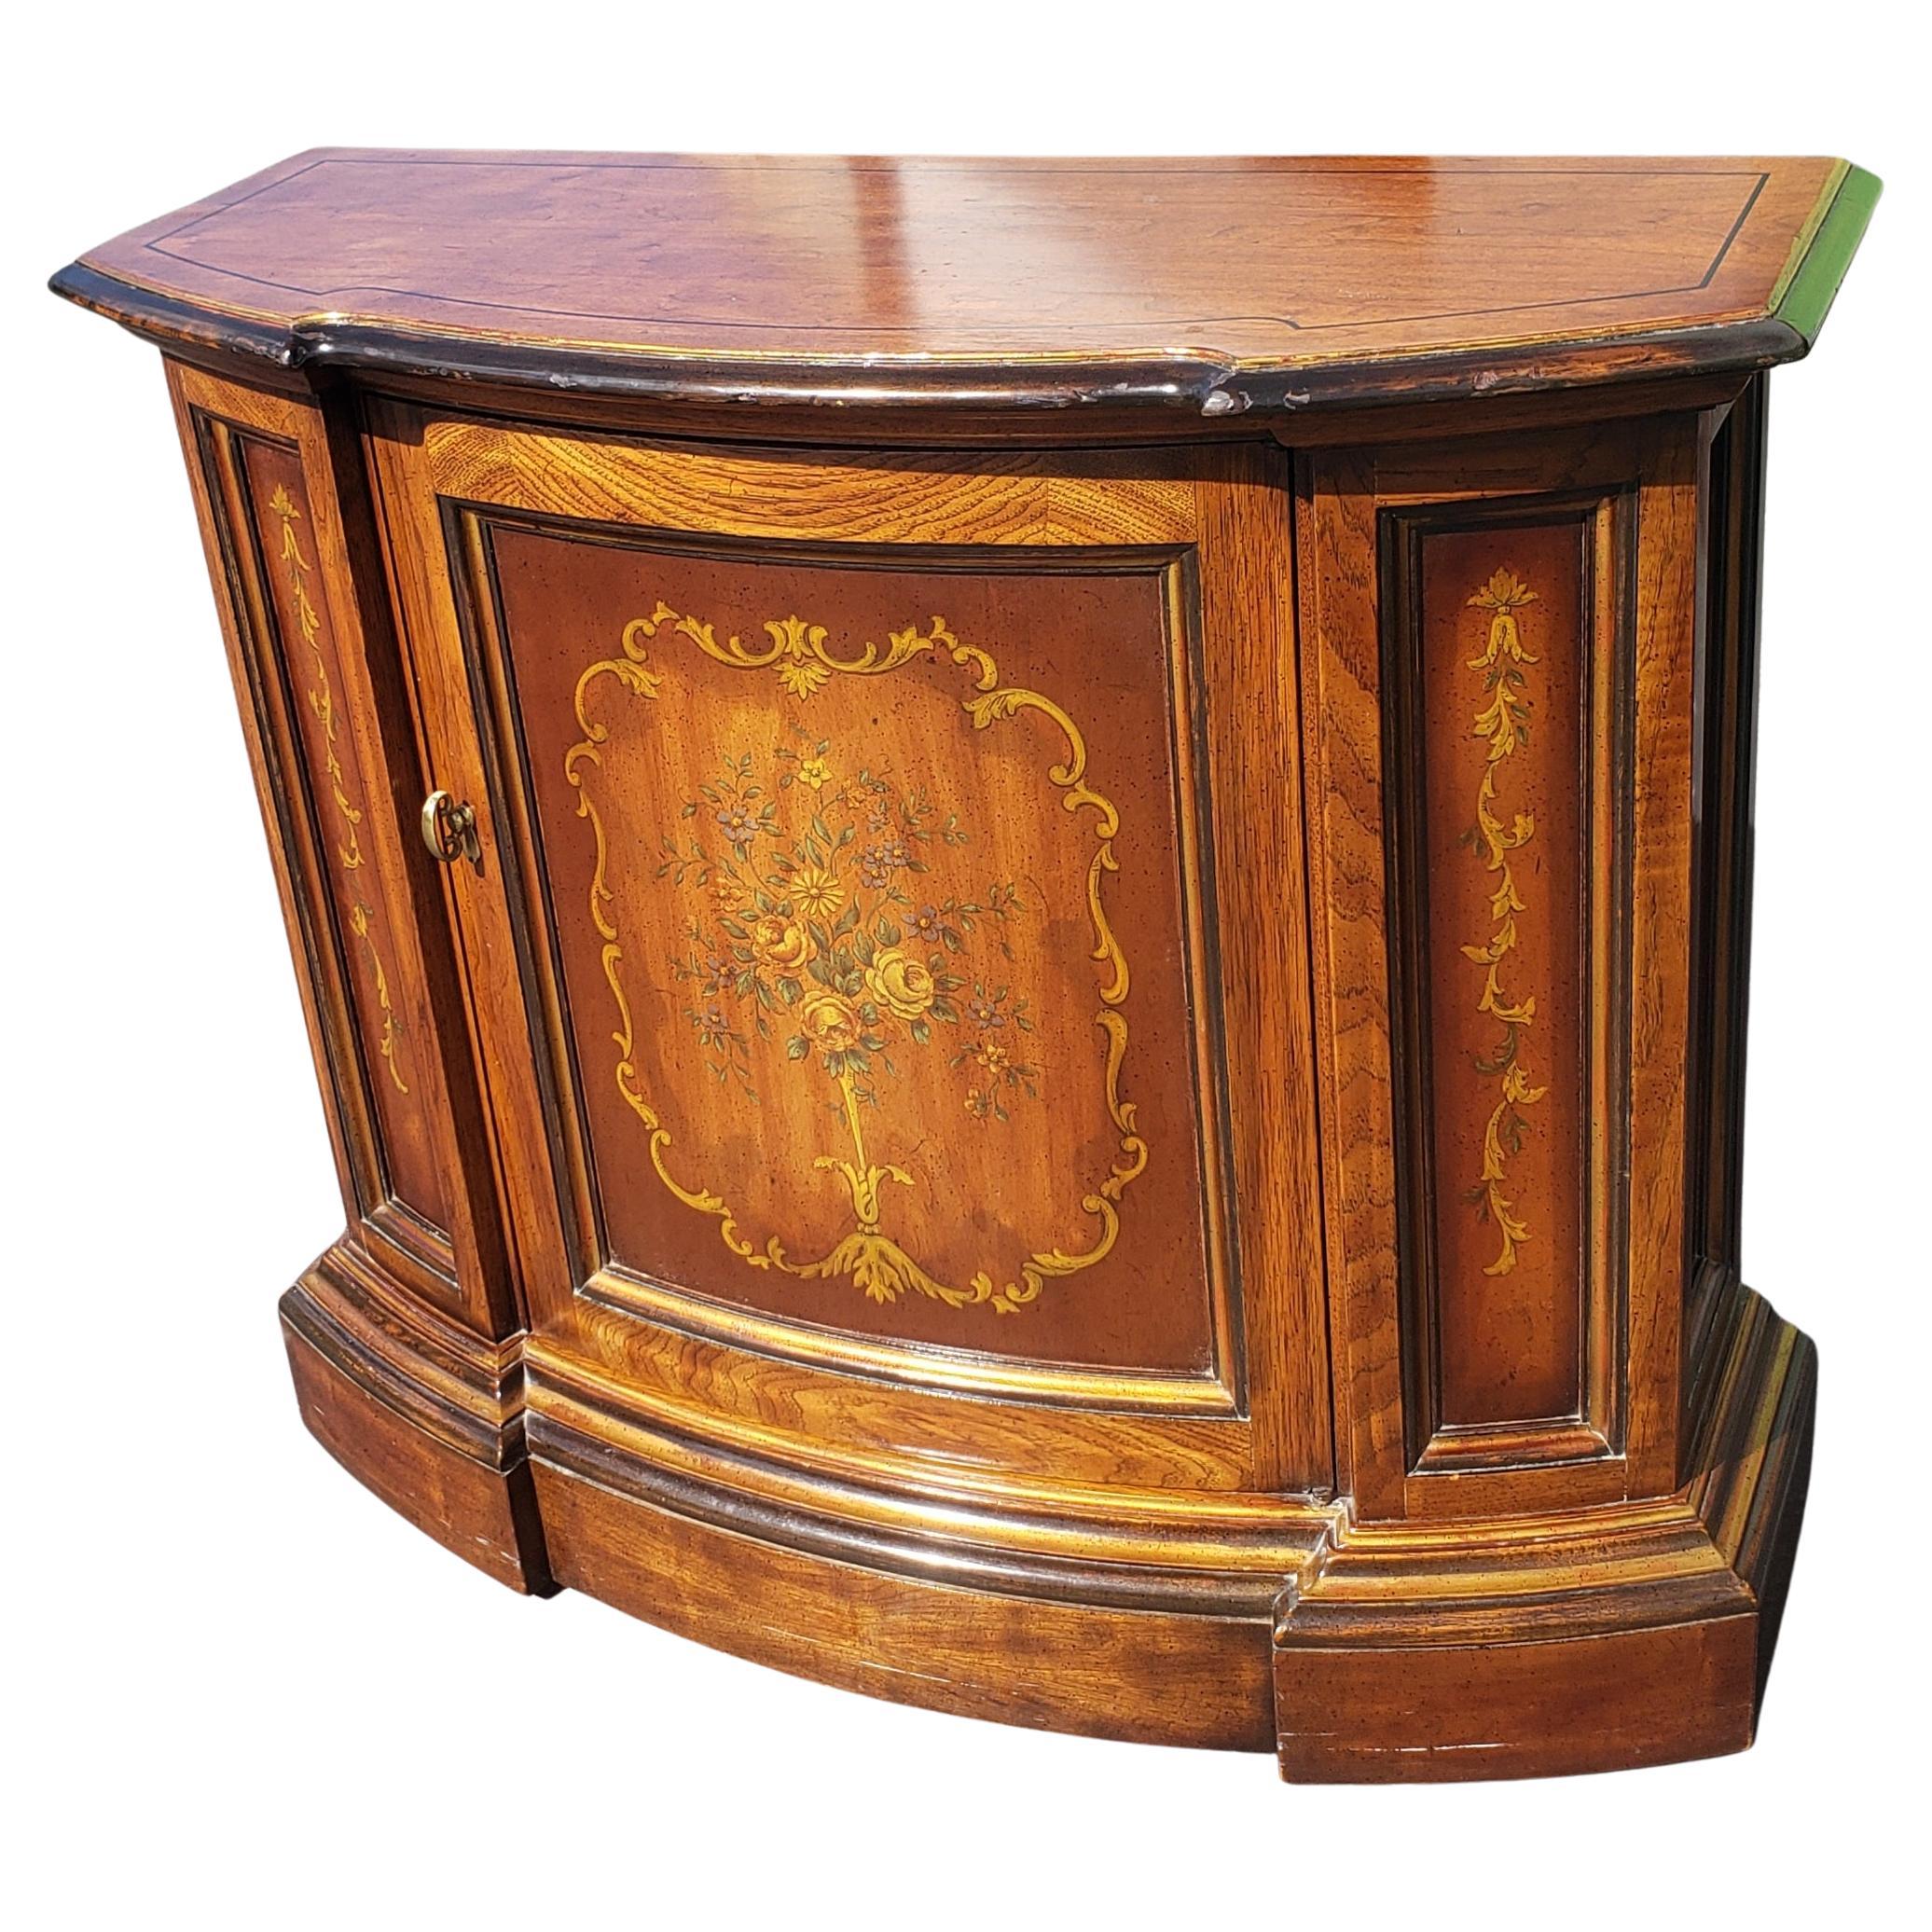 Beautiful Drexel heritage Furnishings Ornate console cabinet table. 
Good vintage condition. Some minor scuffs. 
Measures 35